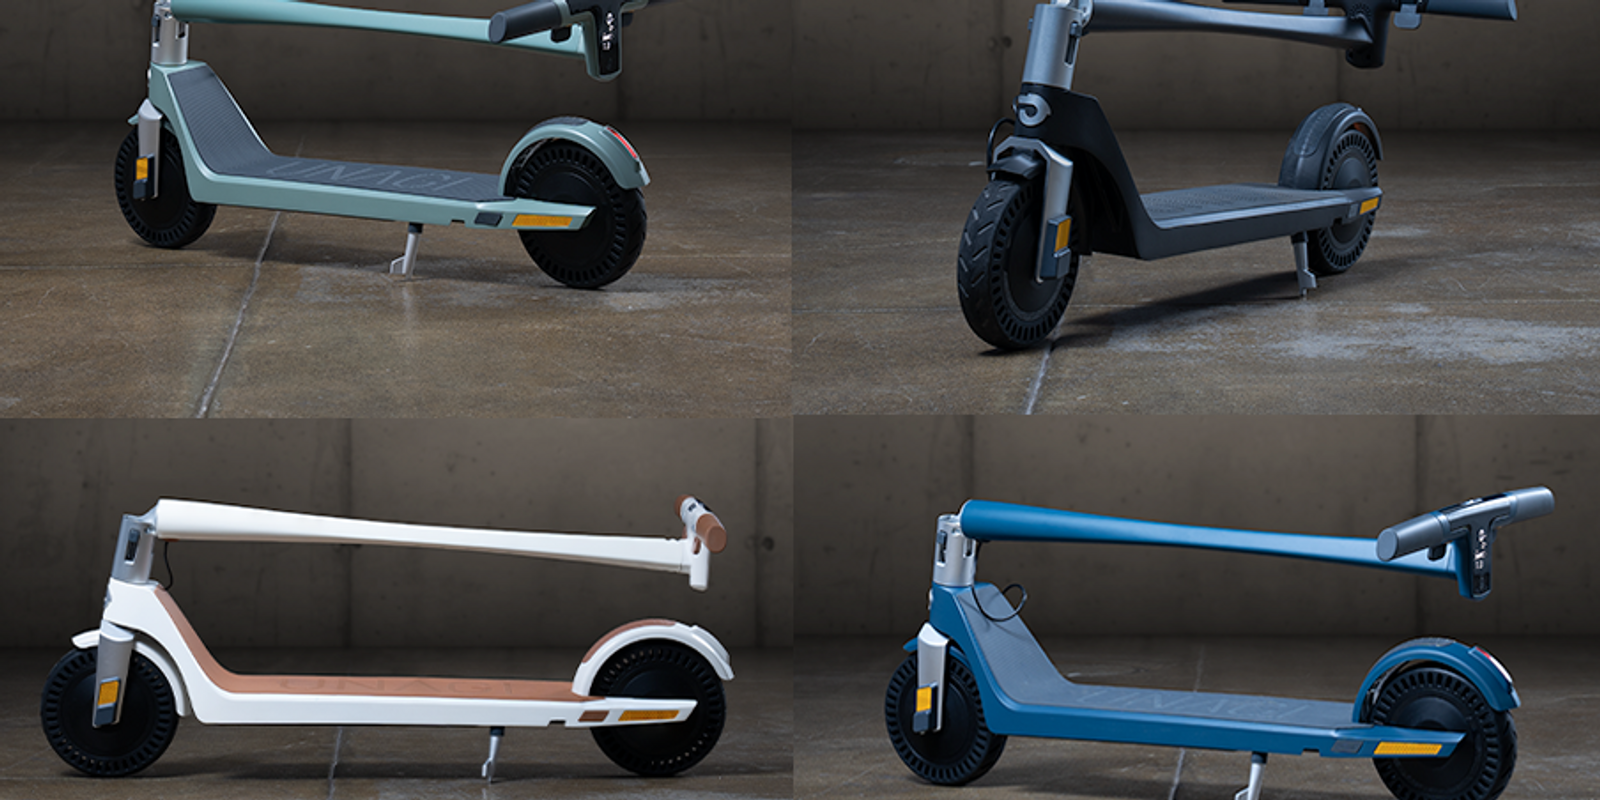 Ride in Style With Four Sleek New Colors!